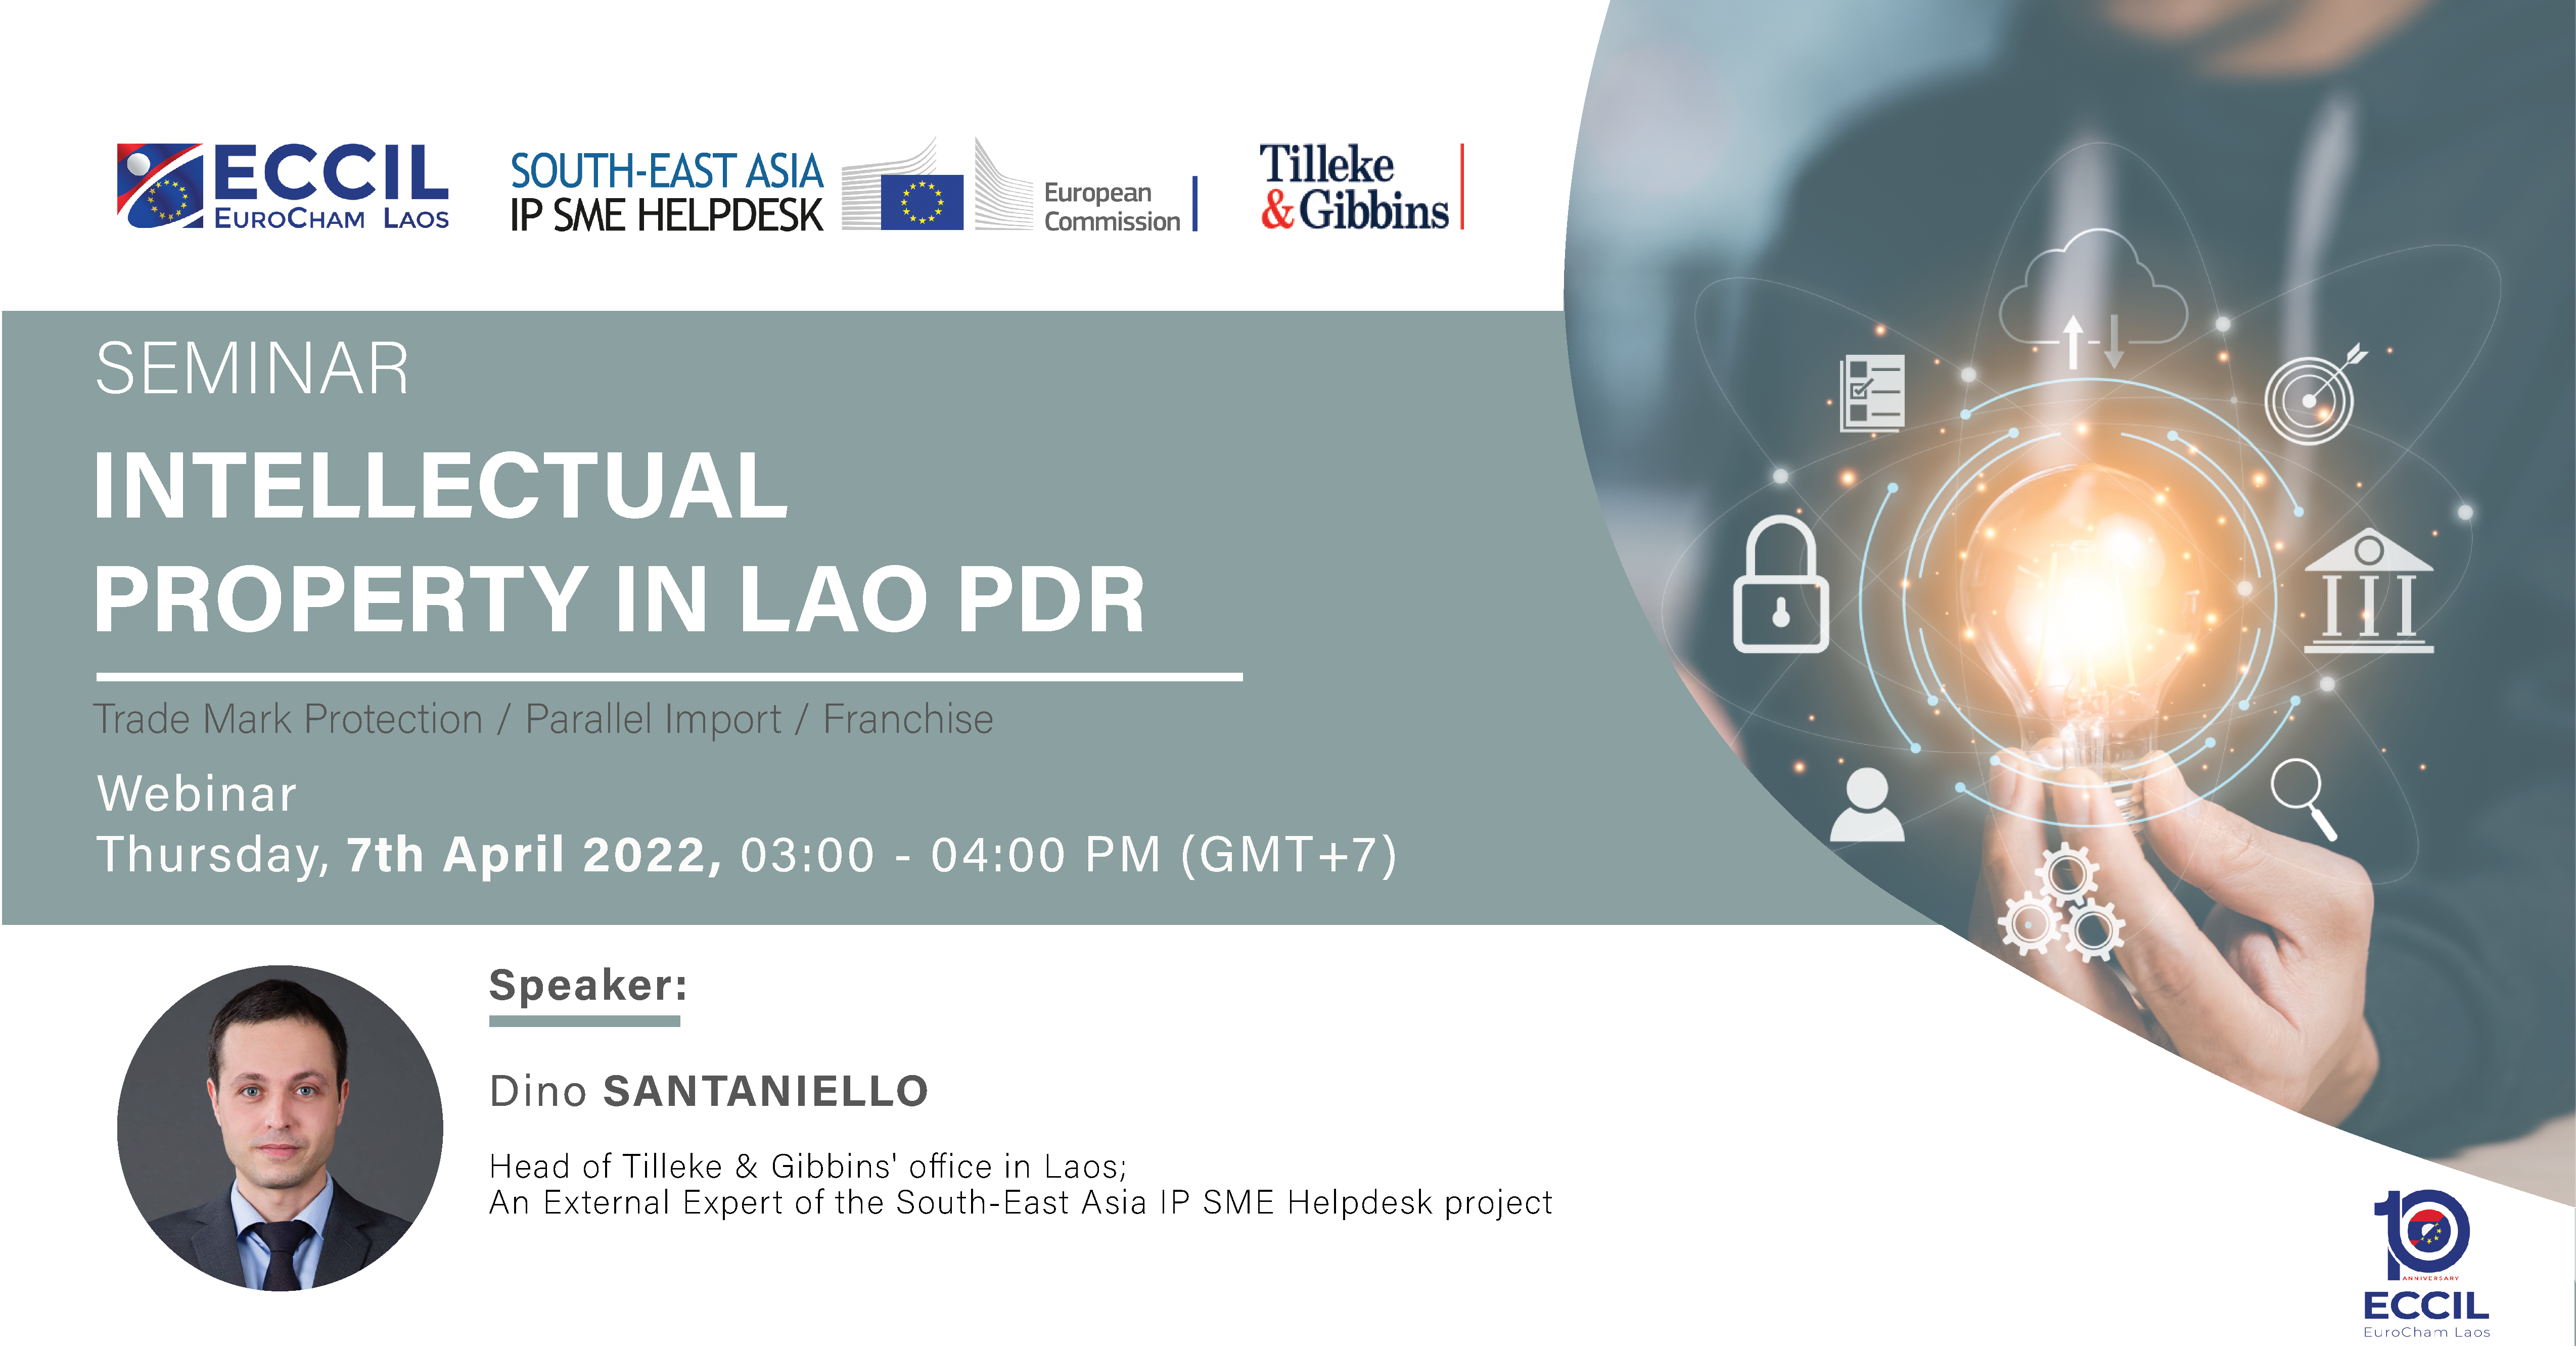 Virtual Training: Intellectual Property in Lao PDR (Co-Organised with ECCIL)_ 7 Apr 2022